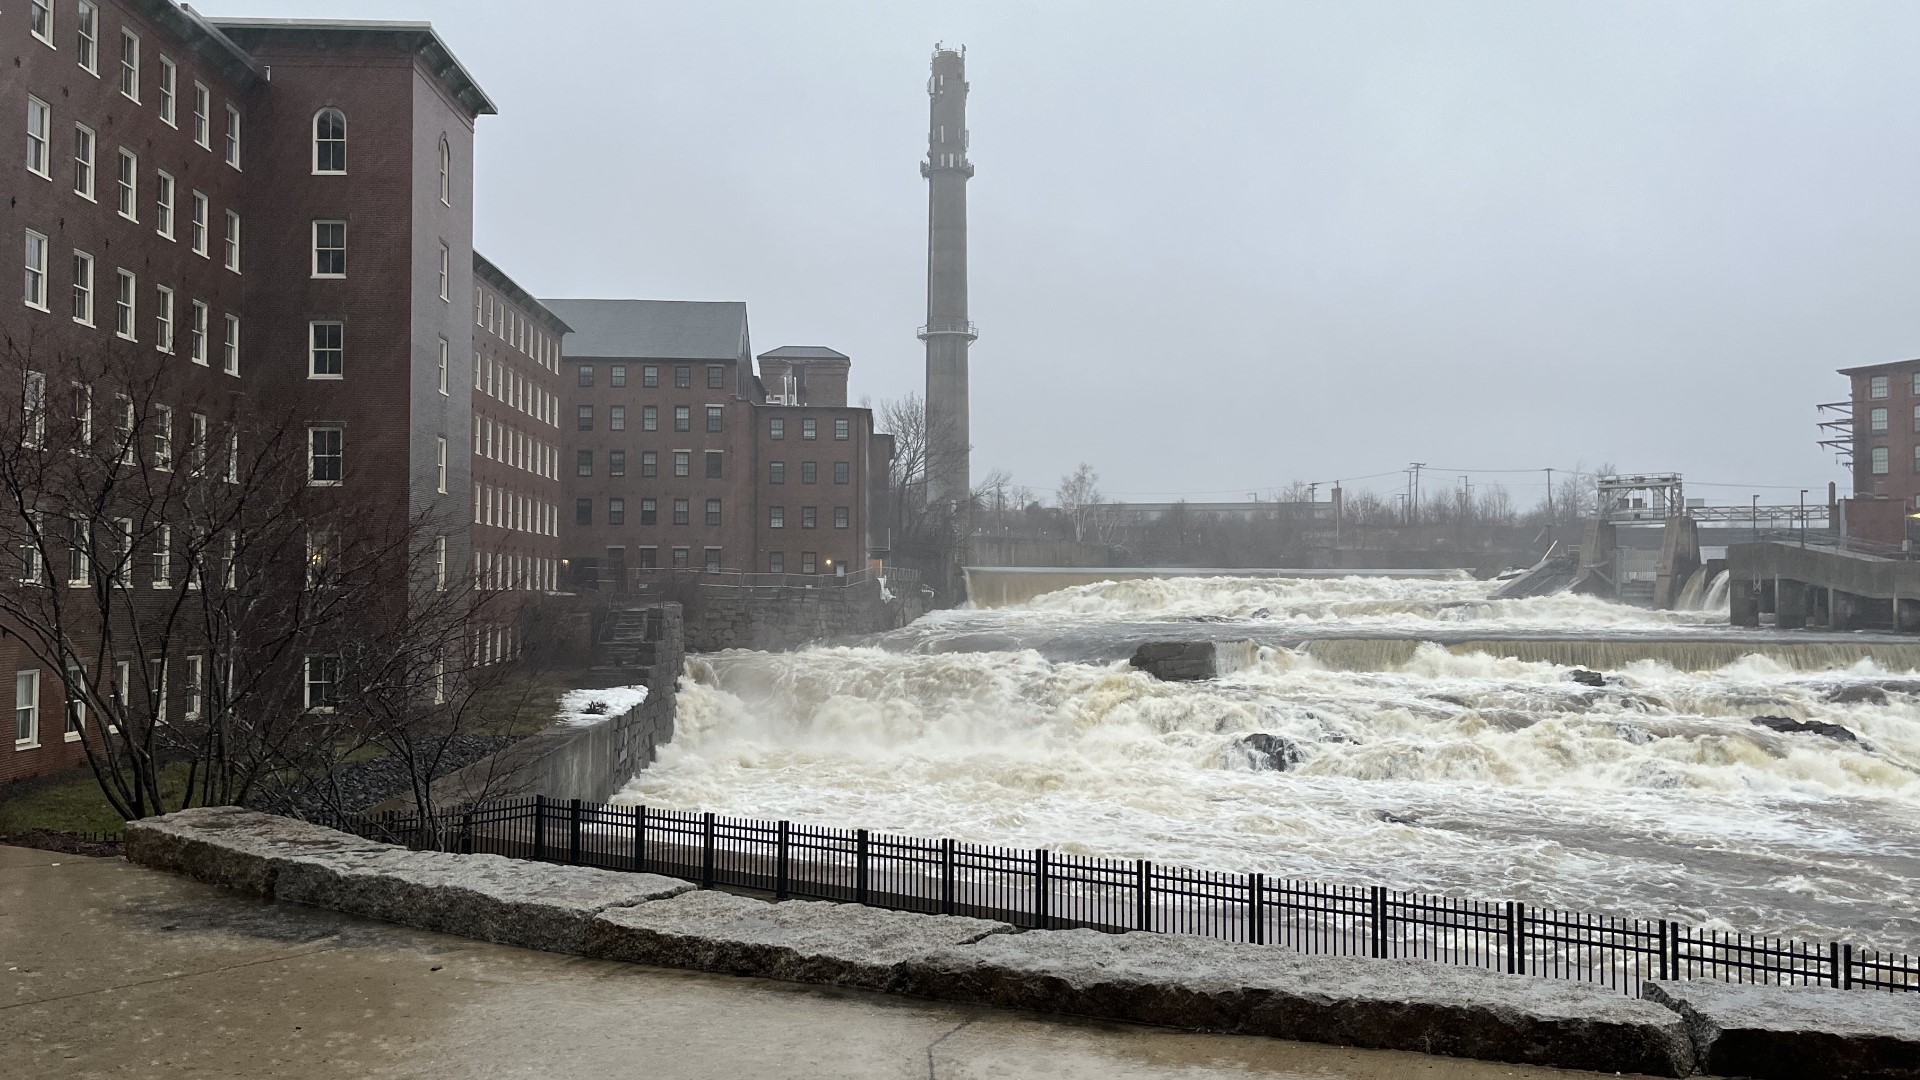 Views of the Saco River in Biddeford during Saturday's storm.